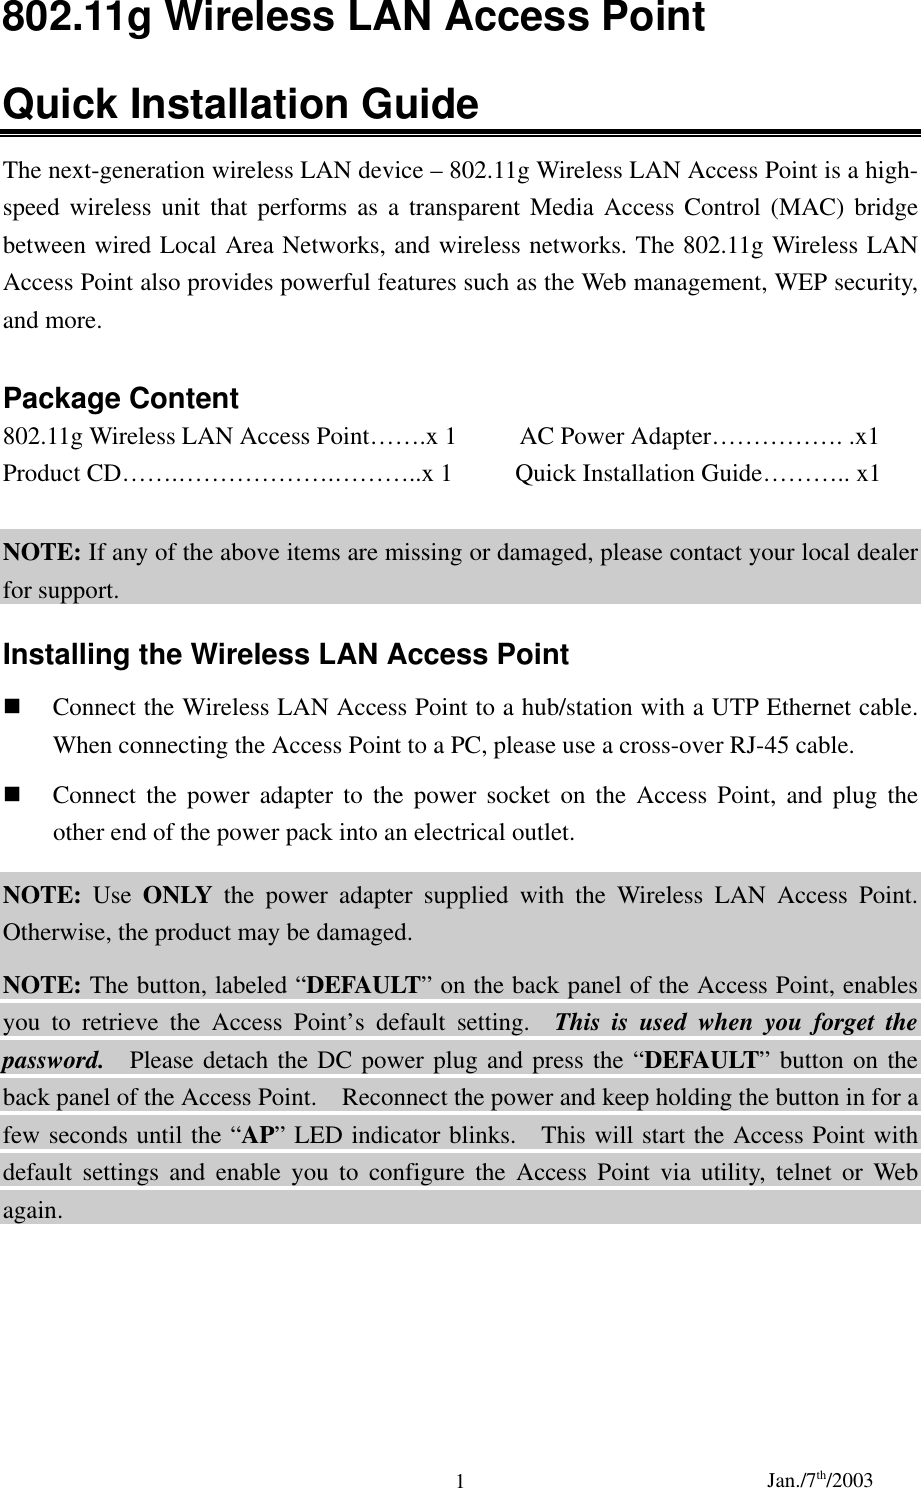 Jan./7th/20031802.11g Wireless LAN Access PointQuick Installation GuideThe next-generation wireless LAN device – 802.11g Wireless LAN Access Point is a high-speed wireless unit that performs as a transparent Media Access Control (MAC) bridgebetween wired Local Area Networks, and wireless networks. The 802.11g Wireless LANAccess Point also provides powerful features such as the Web management, WEP security,and more.Package Content802.11g Wireless LAN Access Point…….x 1          AC Power Adapter……………. .x1Product CD…….……………….………..x 1     Quick Installation Guide……….. x1NOTE: If any of the above items are missing or damaged, please contact your local dealerfor support.Installing the Wireless LAN Access Point Connect the Wireless LAN Access Point to a hub/station with a UTP Ethernet cable.When connecting the Access Point to a PC, please use a cross-over RJ-45 cable. Connect the power adapter to the power socket on the Access Point, and plug theother end of the power pack into an electrical outlet.NOTE: Use ONLY the power adapter supplied with the Wireless LAN Access Point.Otherwise, the product may be damaged.NOTE: The button, labeled “DEFAULT” on the back panel of the Access Point, enablesyou to retrieve the Access Point’s default setting.  This is used when you forget thepassword.  Please detach the DC power plug and press the “DEFAULT” button on theback panel of the Access Point.    Reconnect the power and keep holding the button in for afew seconds until the “AP” LED indicator blinks.    This will start the Access Point withdefault settings and enable you to configure the Access Point via utility, telnet or Webagain.